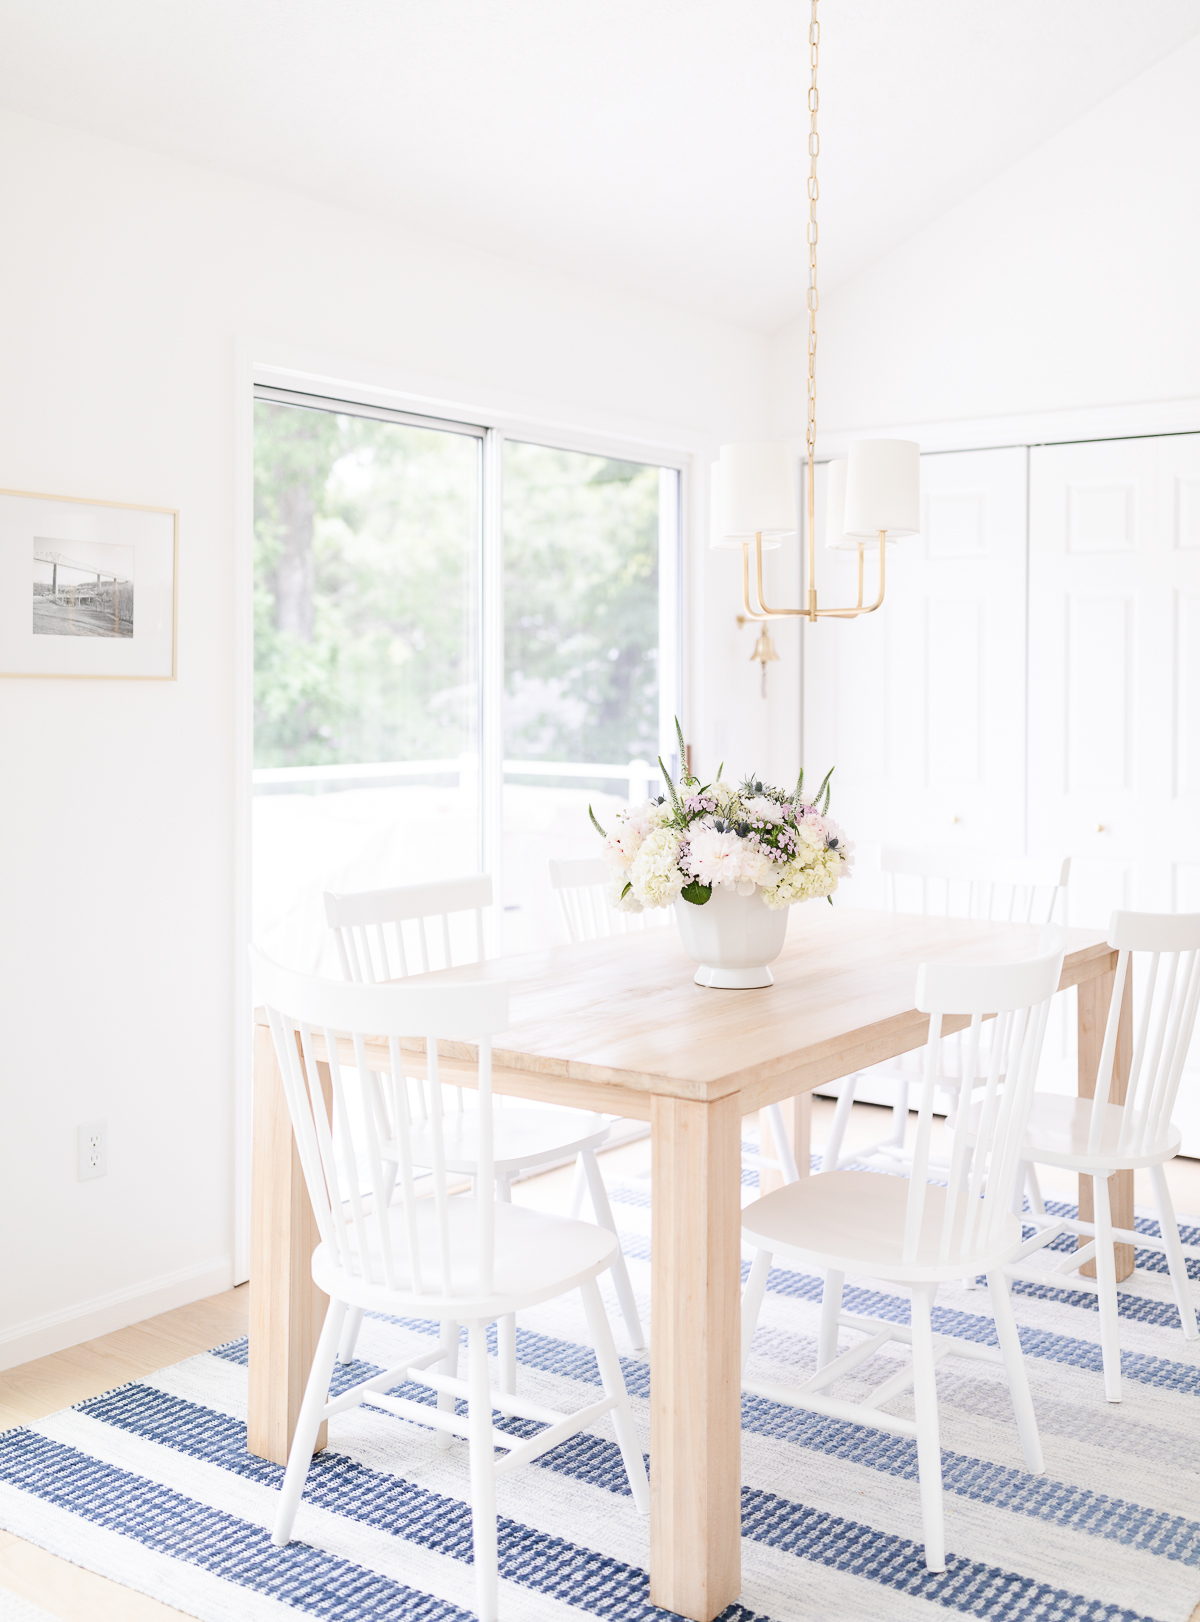 A white kitchen with a teak dining table and a blue and white striped rug